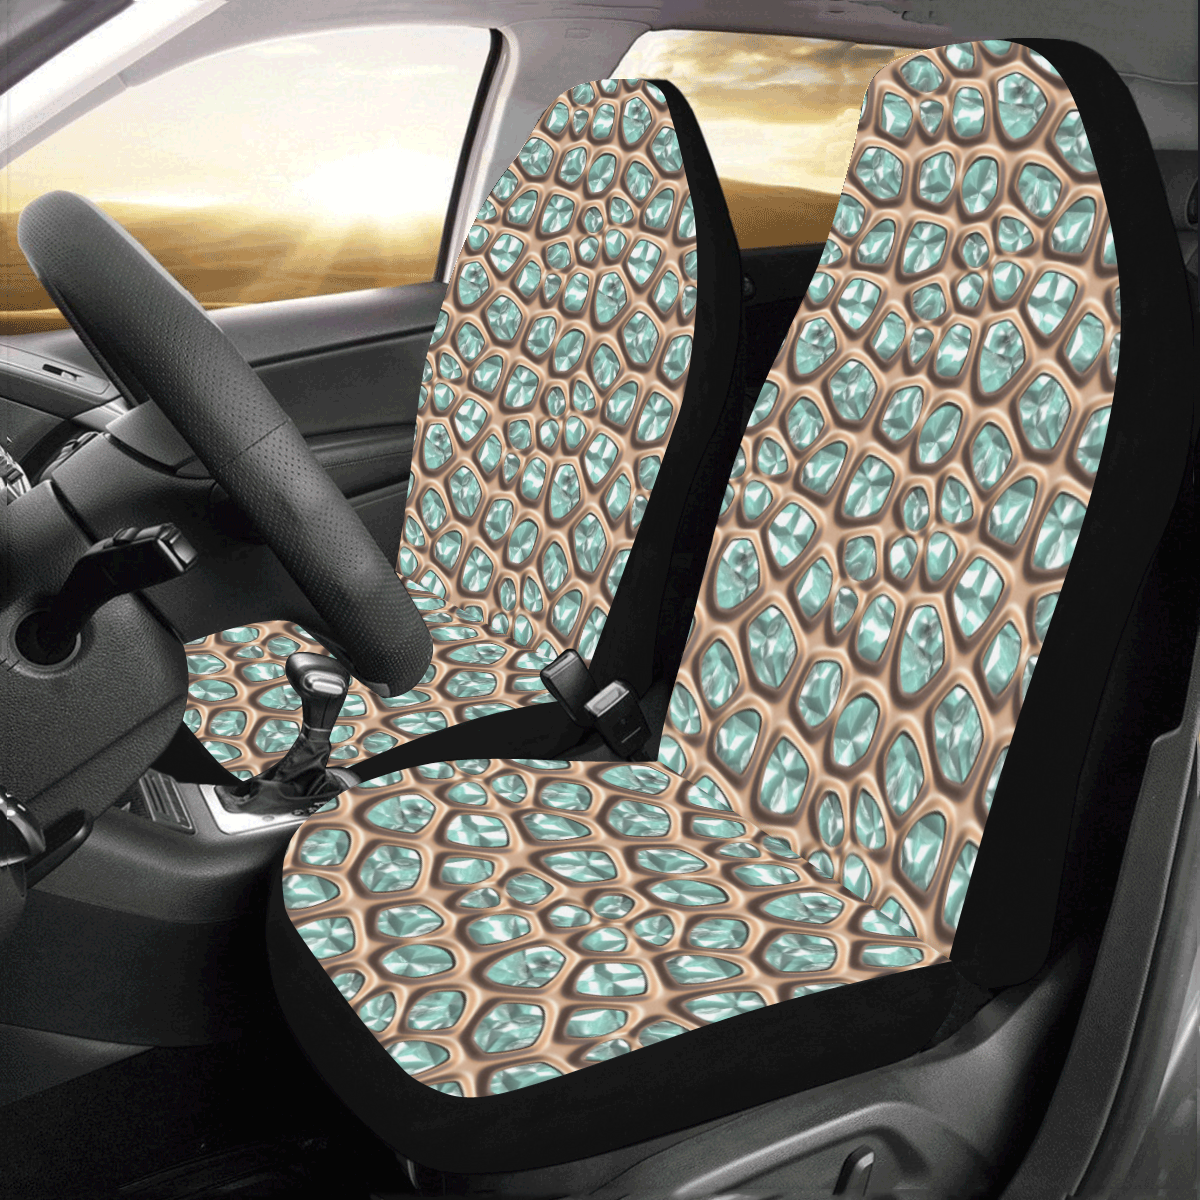 Green crystals Car Seat Covers (Set of 2)